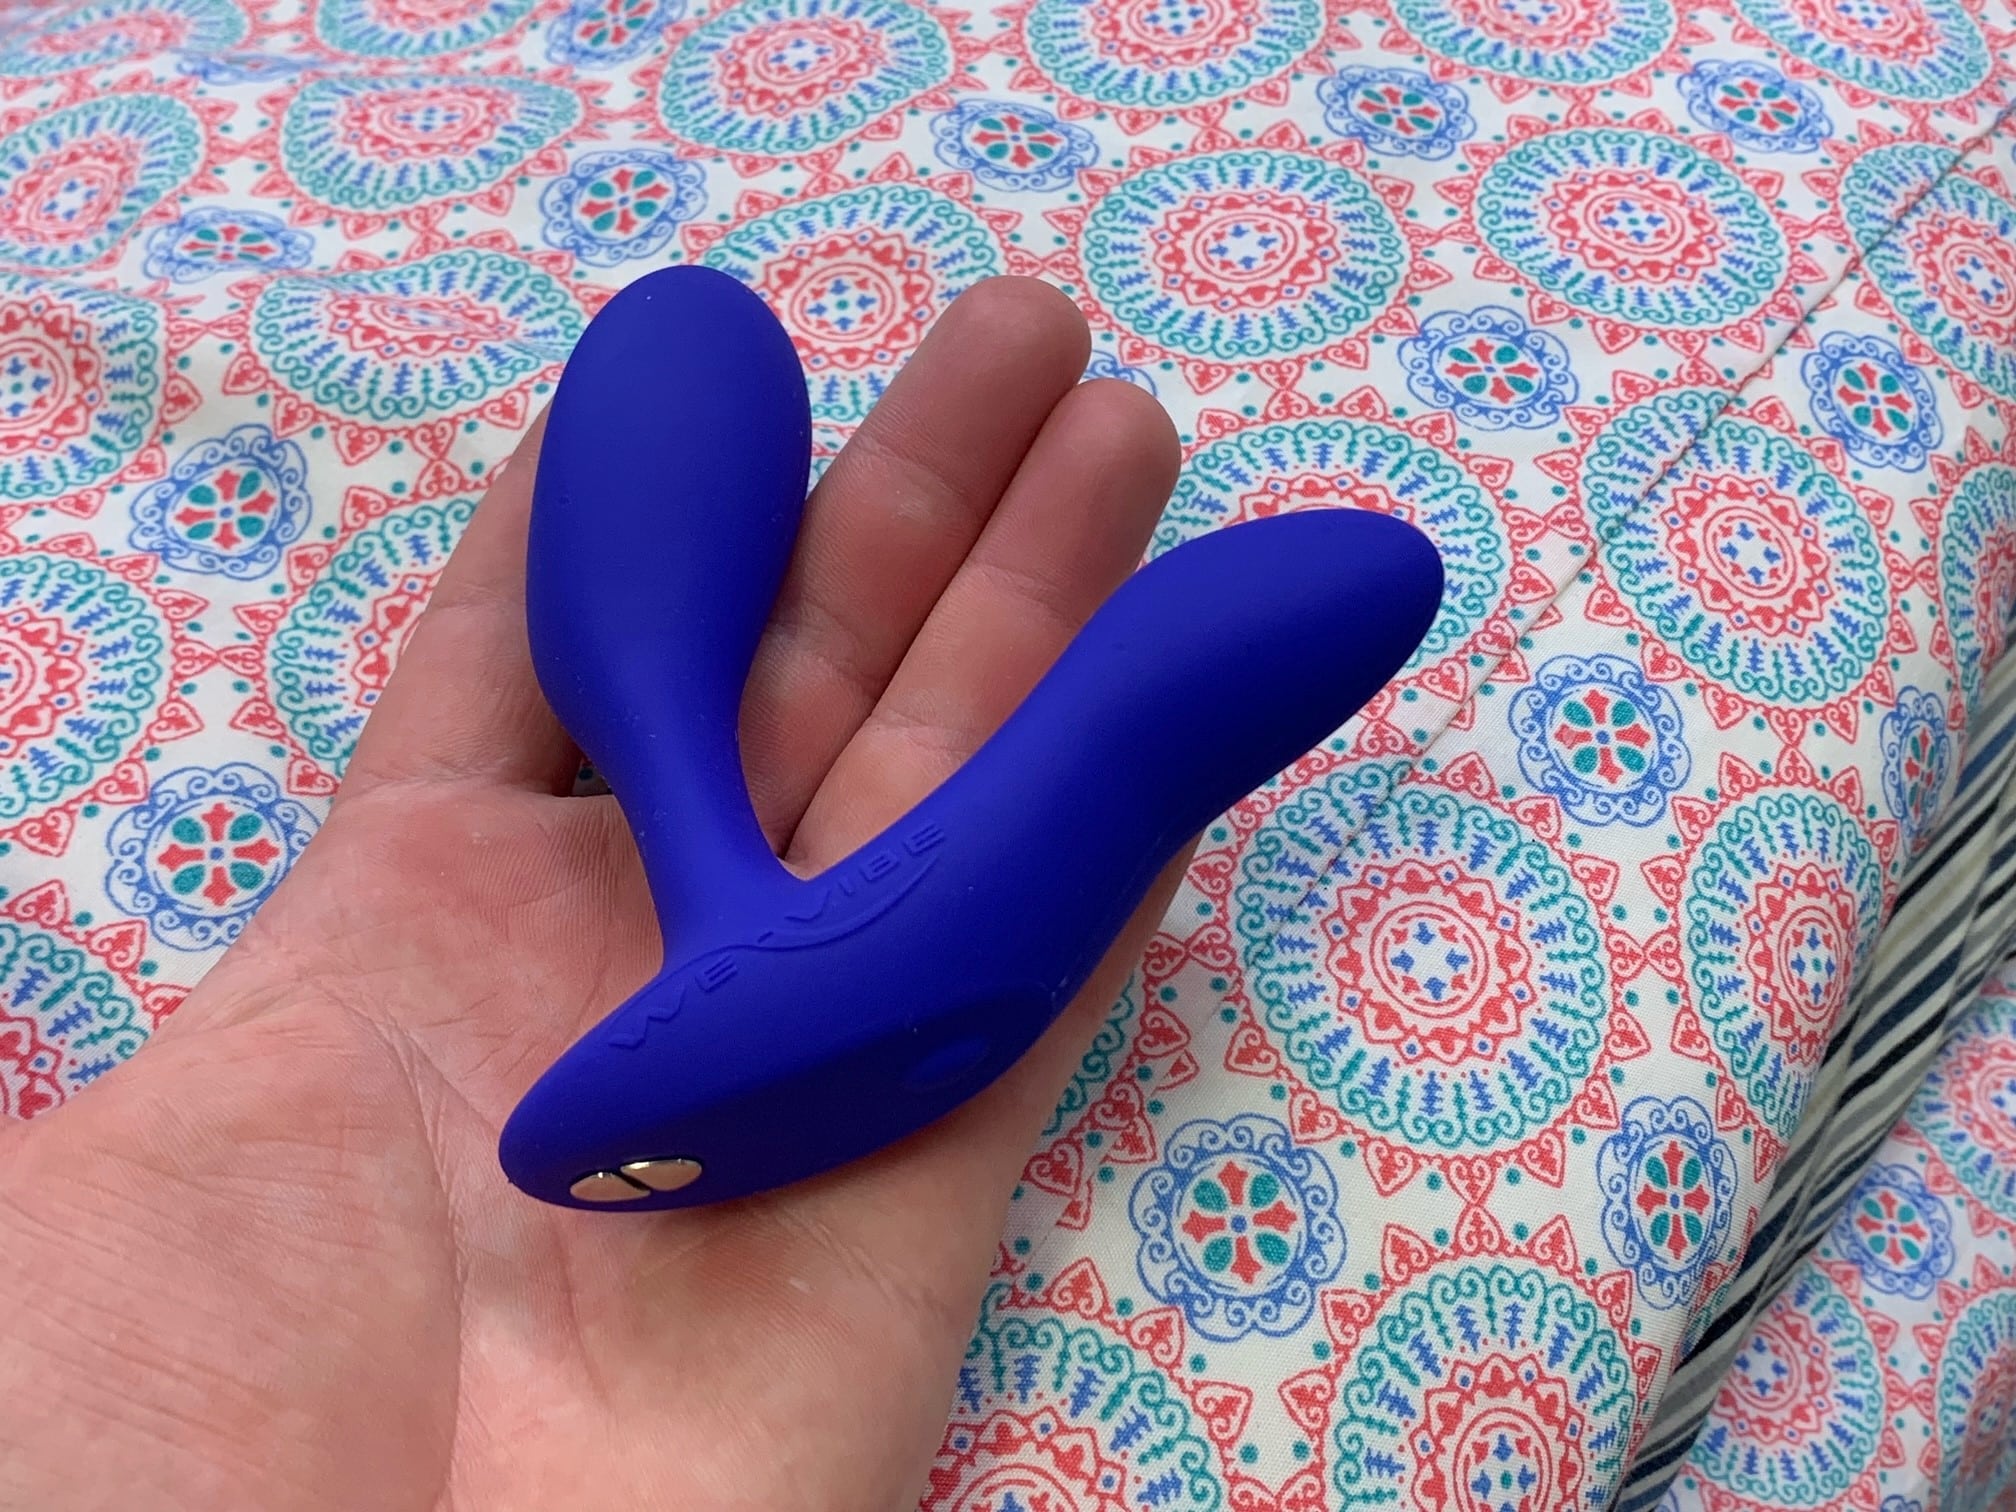 My Personal Experiences with We-Vibe Vector+